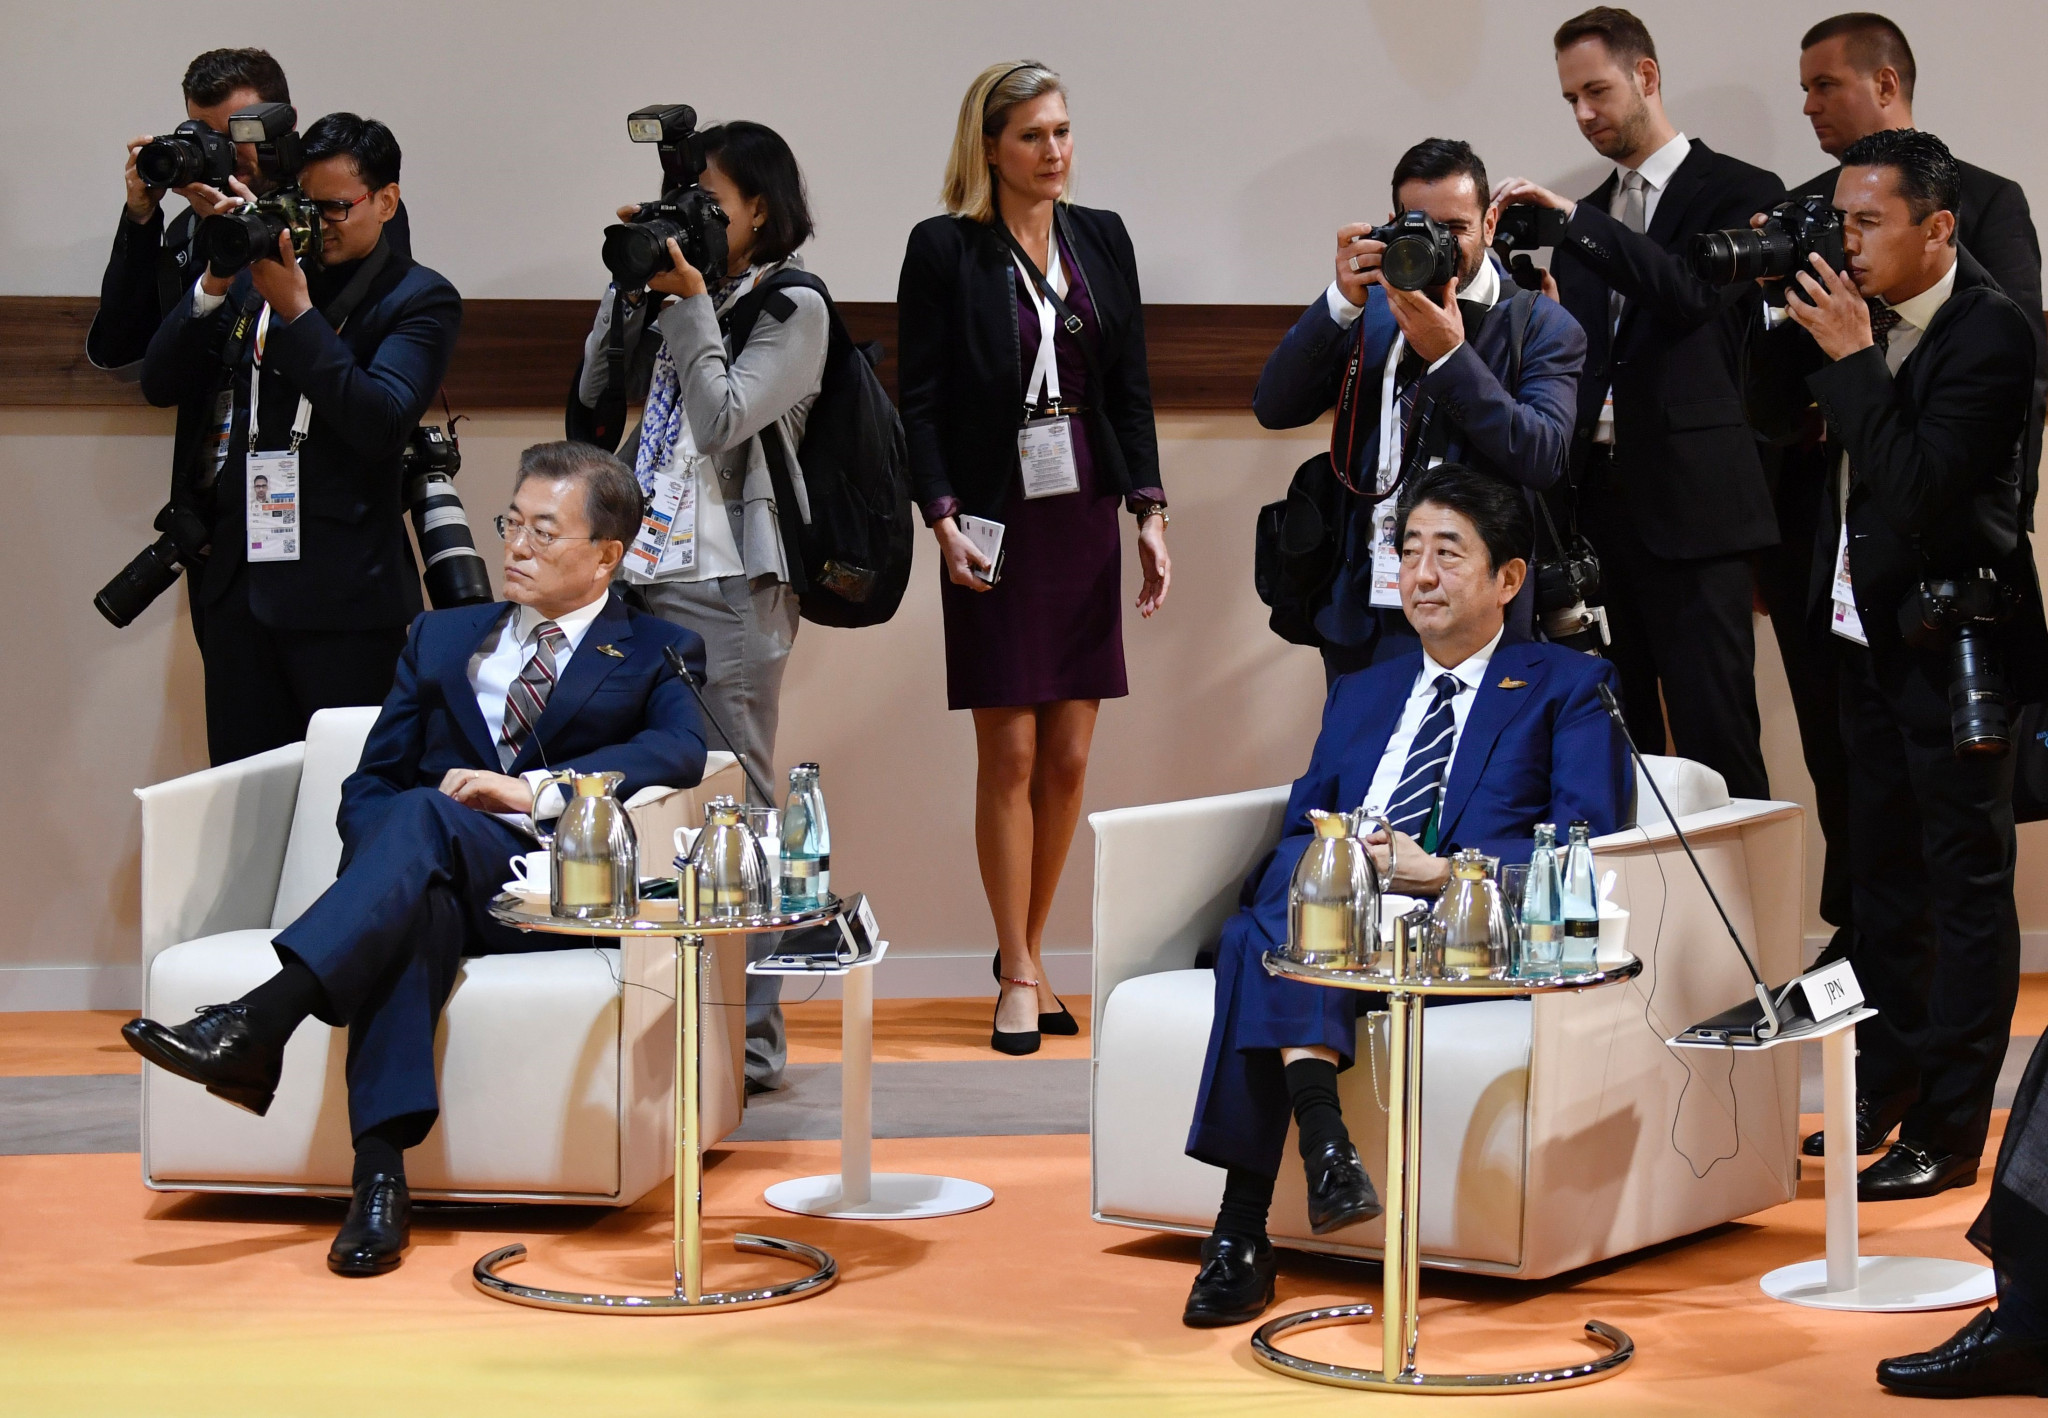 The administration of South Korea President Moon Jae-in, left, invited Shinzō Abe, right, to attend the Pyeongchang 2018 Opening Ceremony ©Getty Images